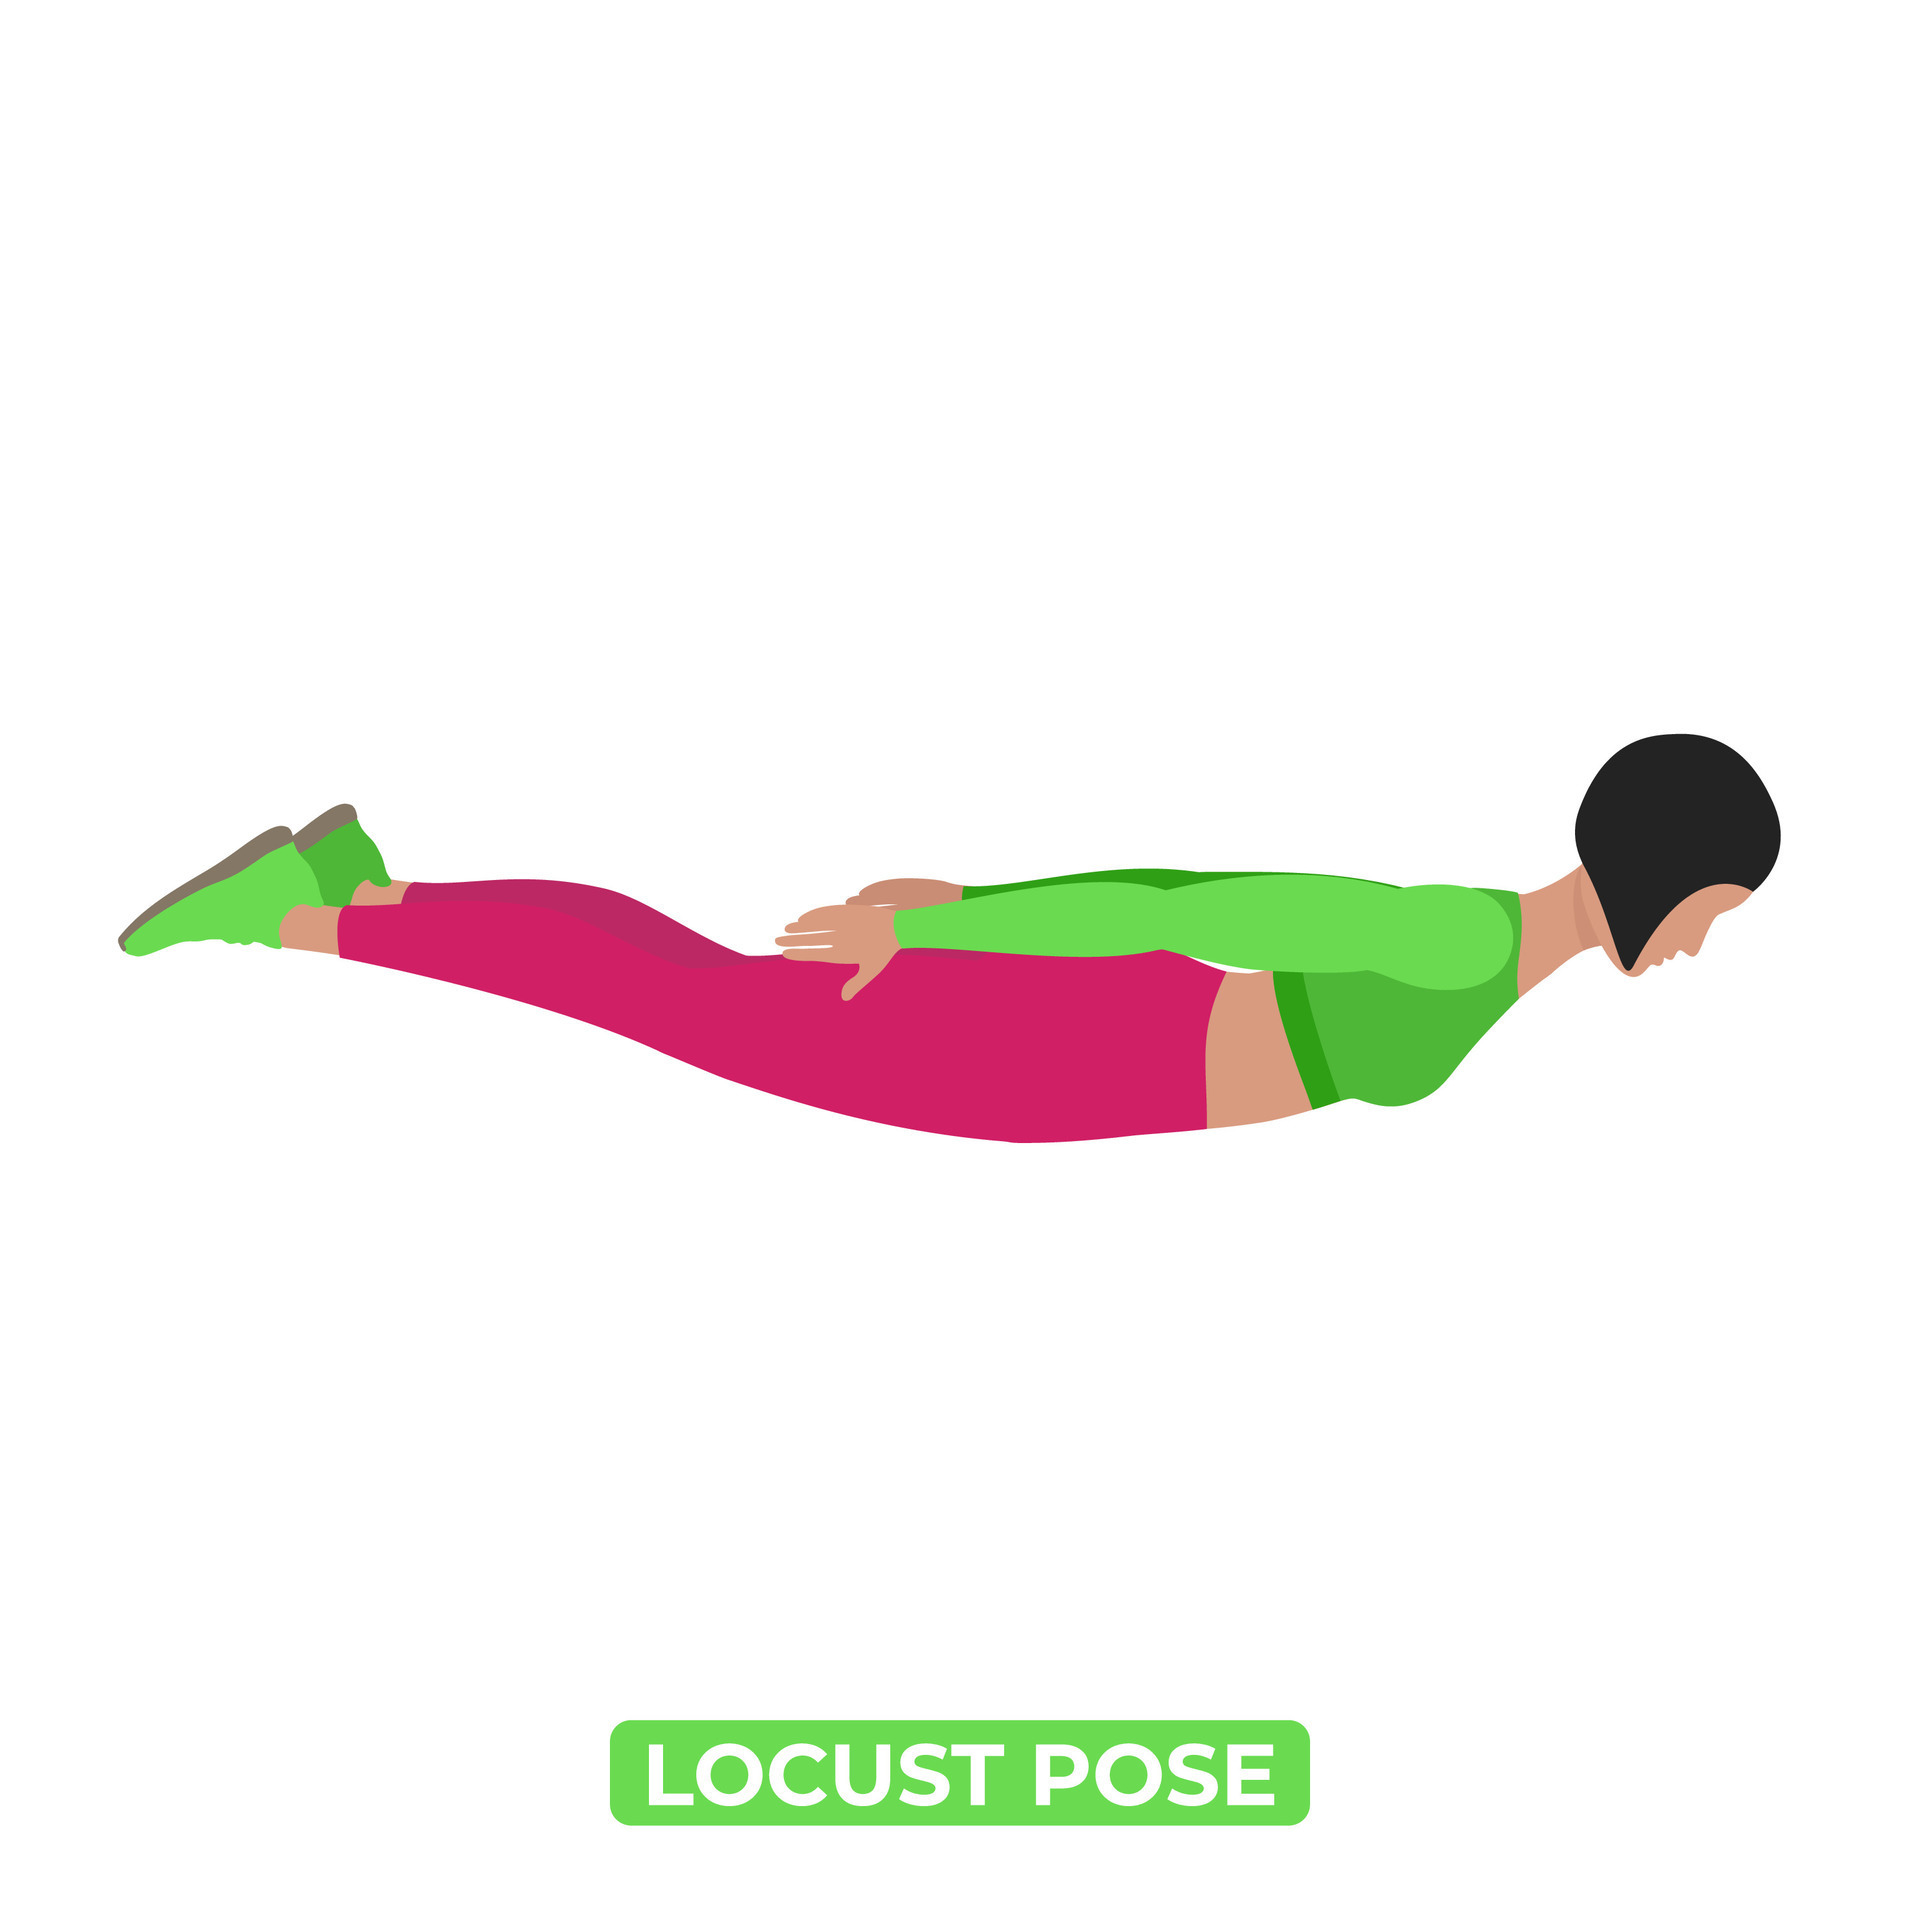 https://static.vecteezy.com/system/resources/previews/029/923/362/original/woman-doing-locust-pose-salabhasana-iron-man-pose-bodyweight-fitness-back-and-core-workout-exercise-an-educational-illustration-on-a-white-background-vector.jpg